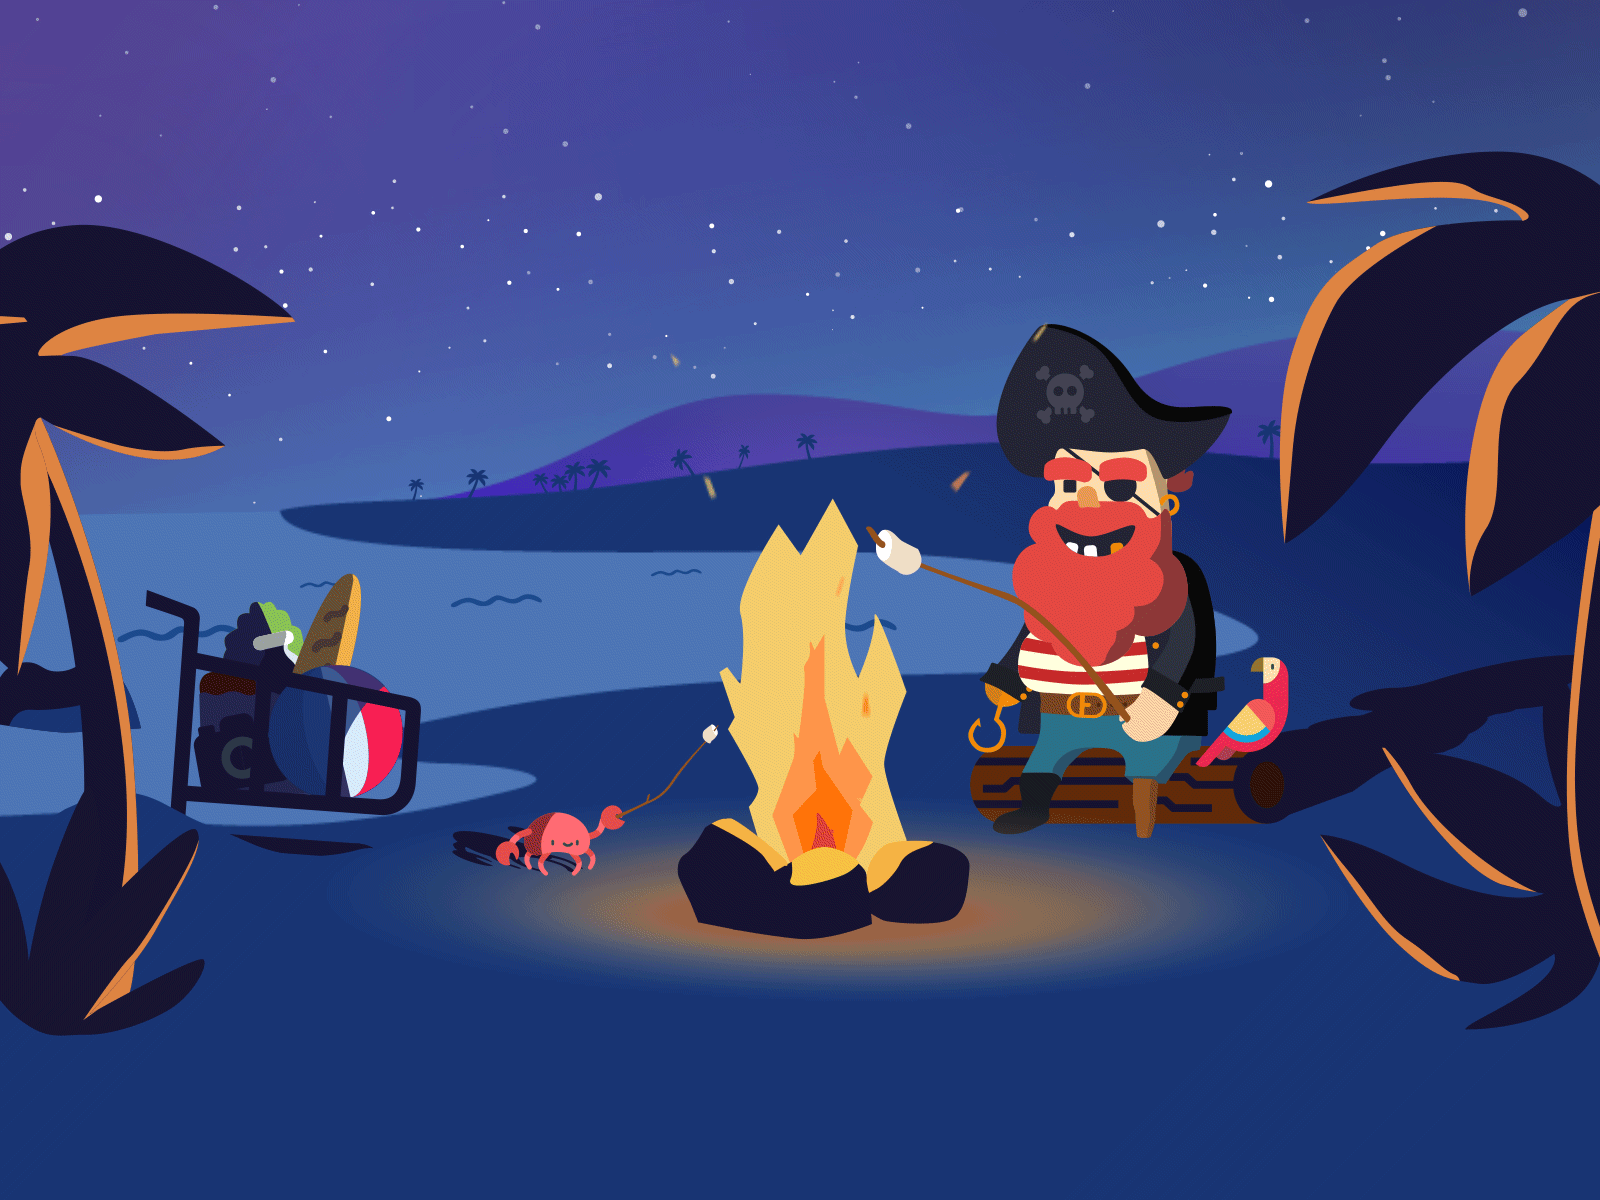 A pirate with his buddy crabby by the fireplace 2d animation 2d character abandoned cart animation character evening fireplace gif ocean palms romance shopping cart stars summer tropical